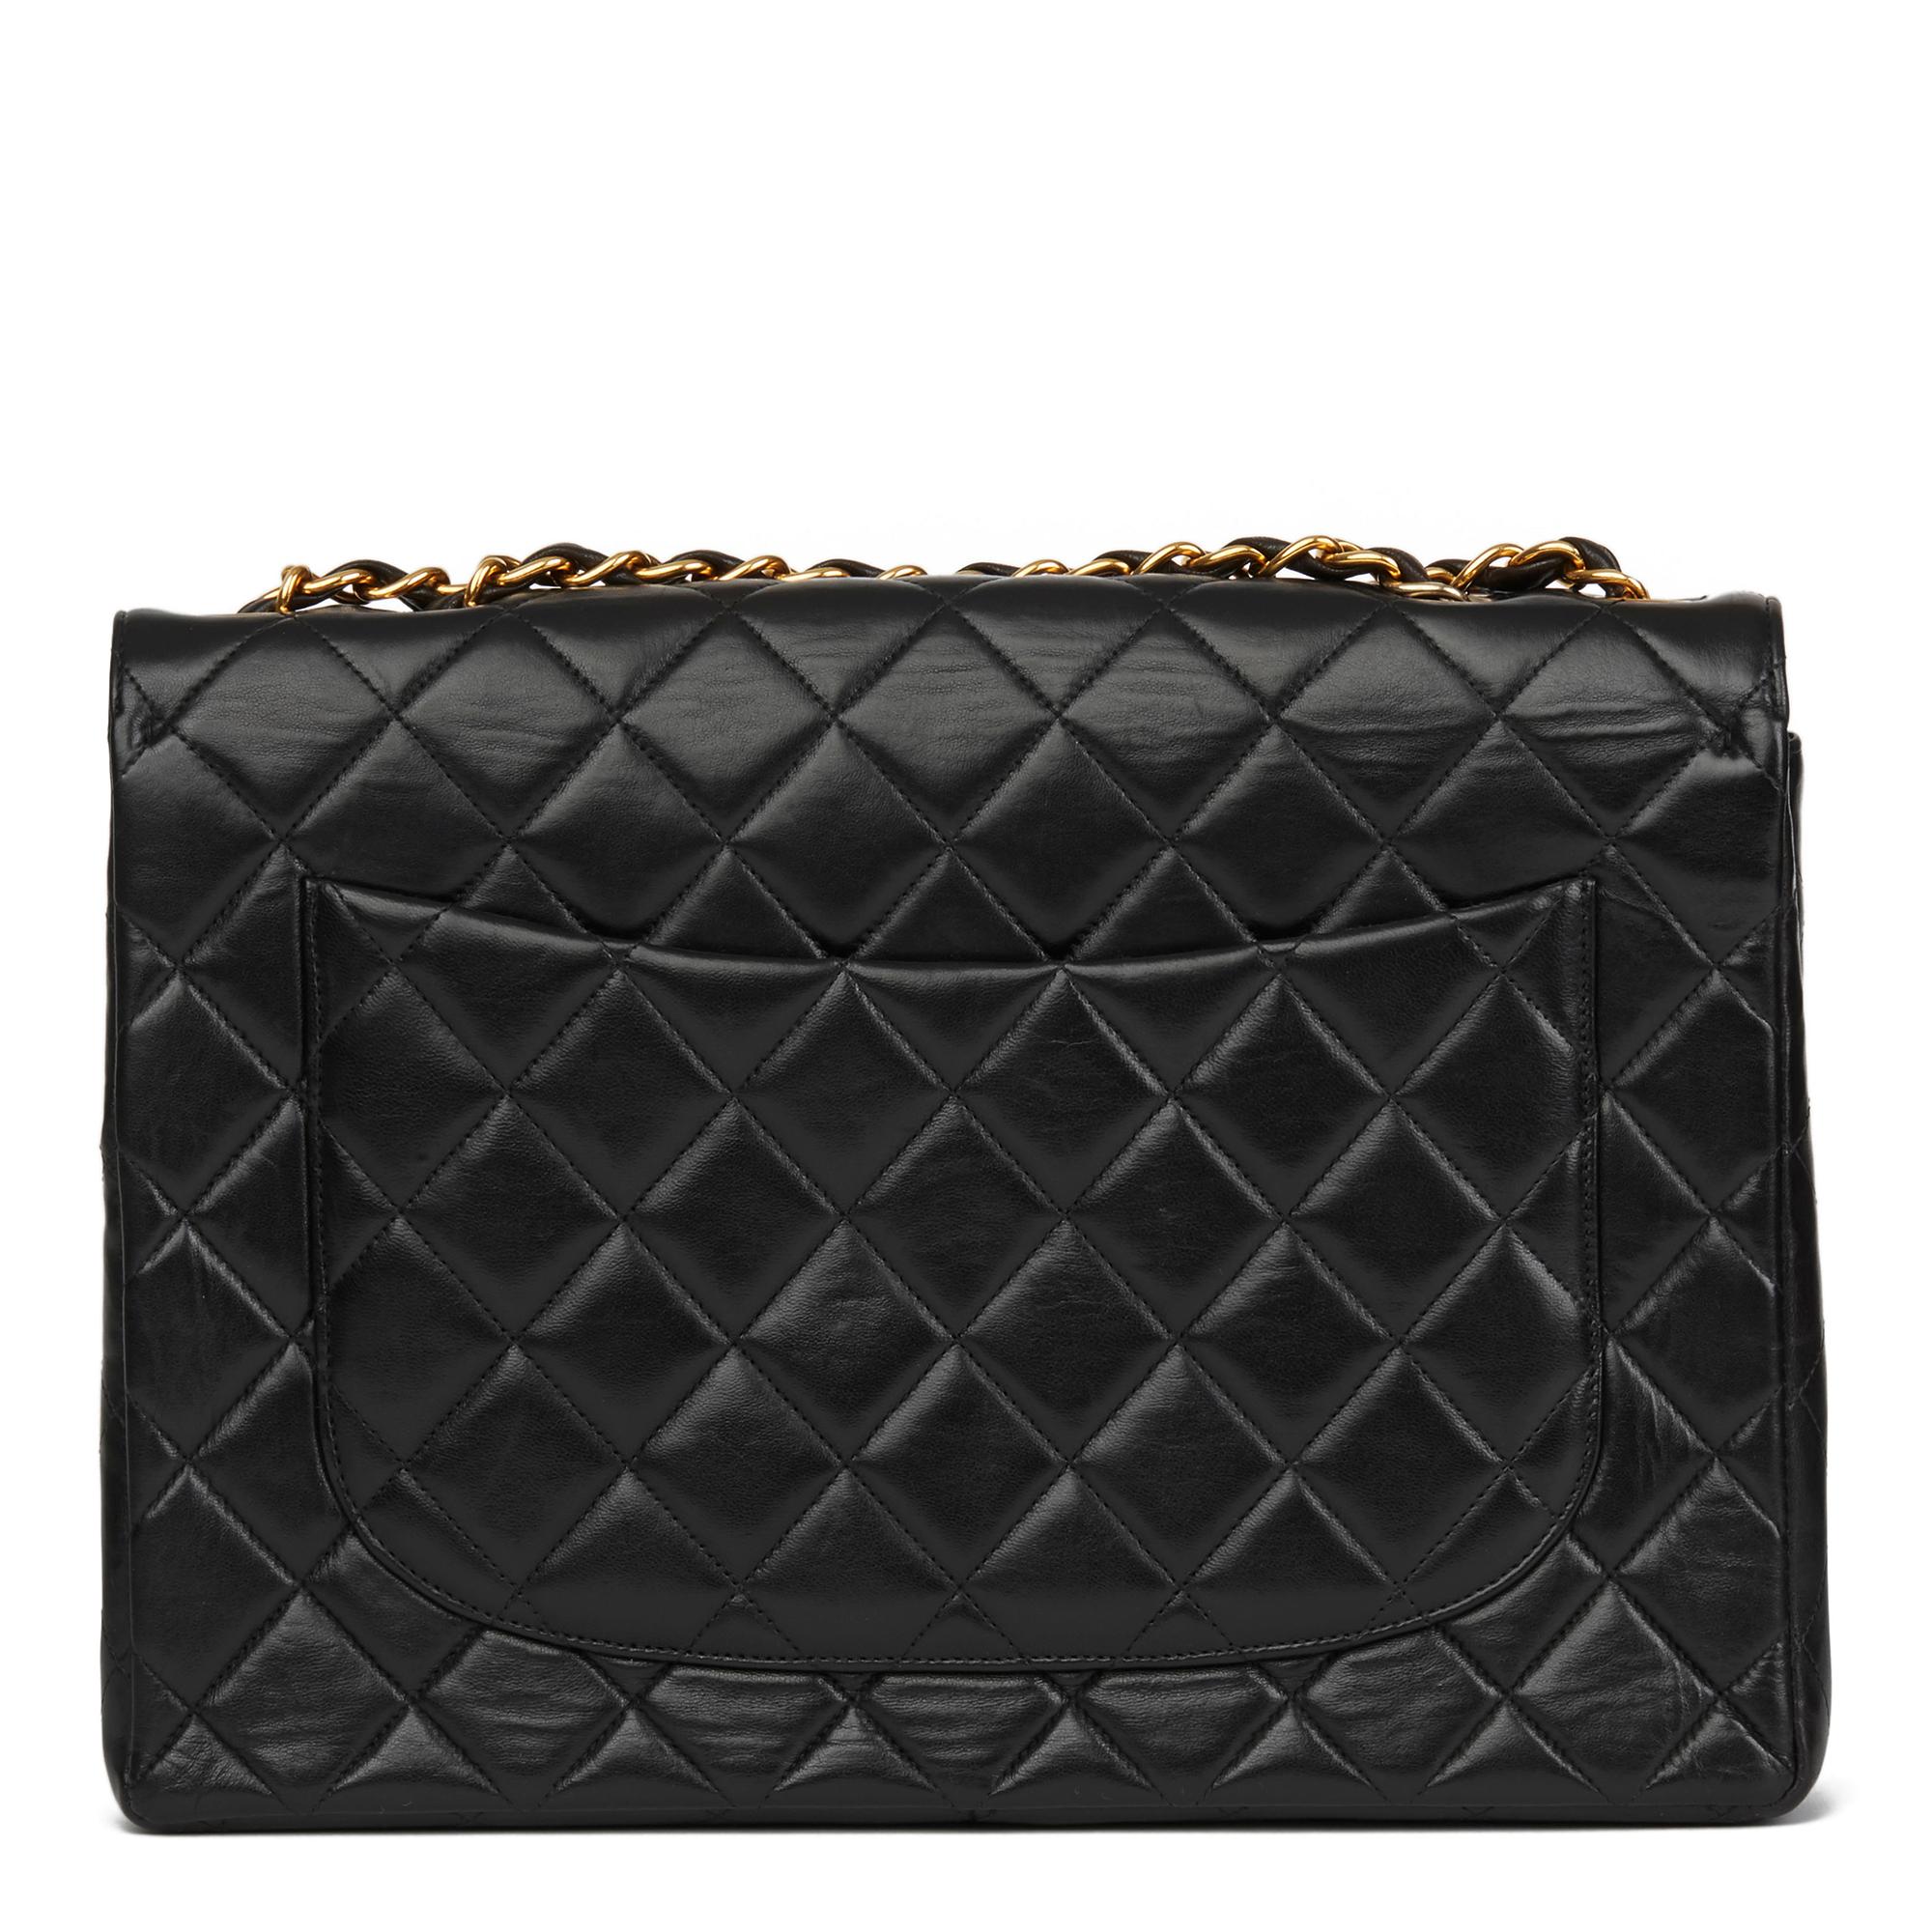 Women's 1997 Chanel Black Quilted Lambskin Vintage Jumbo Classic Single Flap Bag